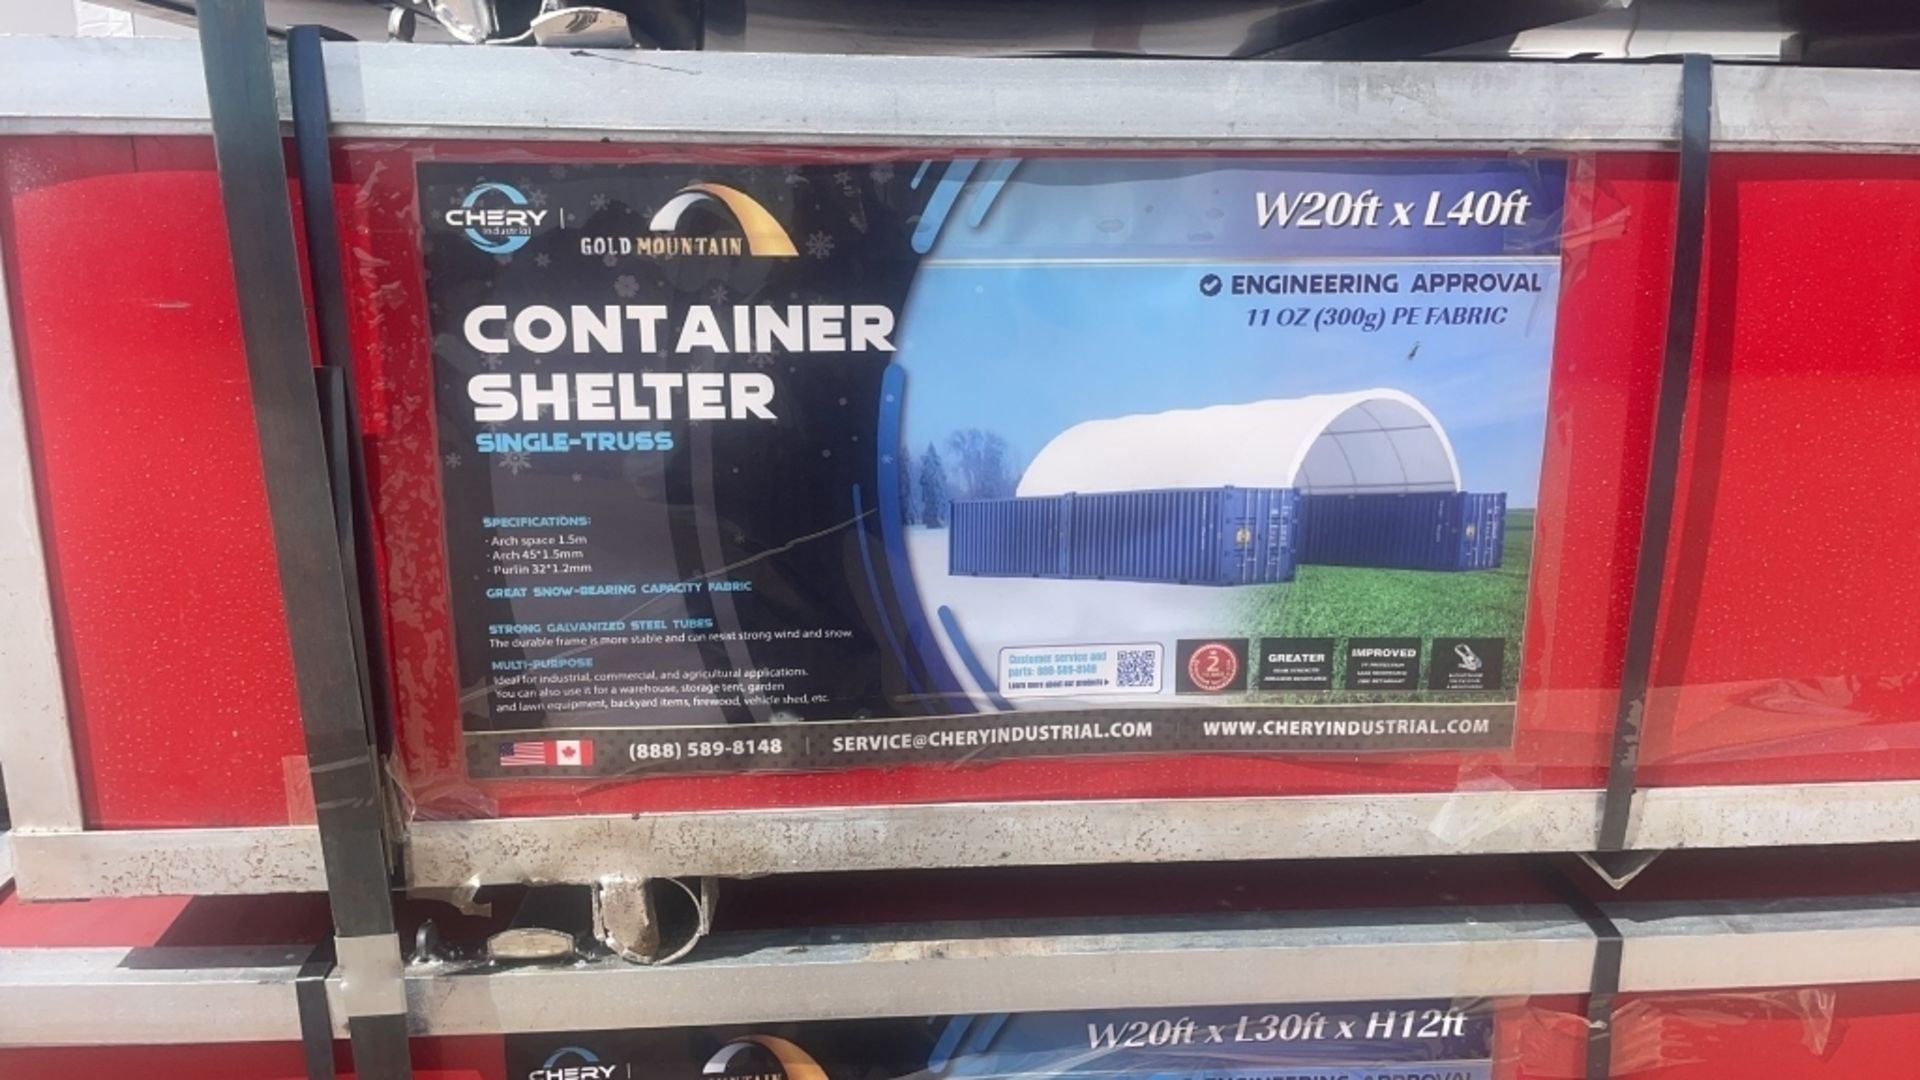 Unused 20x40 Dome Container Shelter in broken box - Image 4 of 8